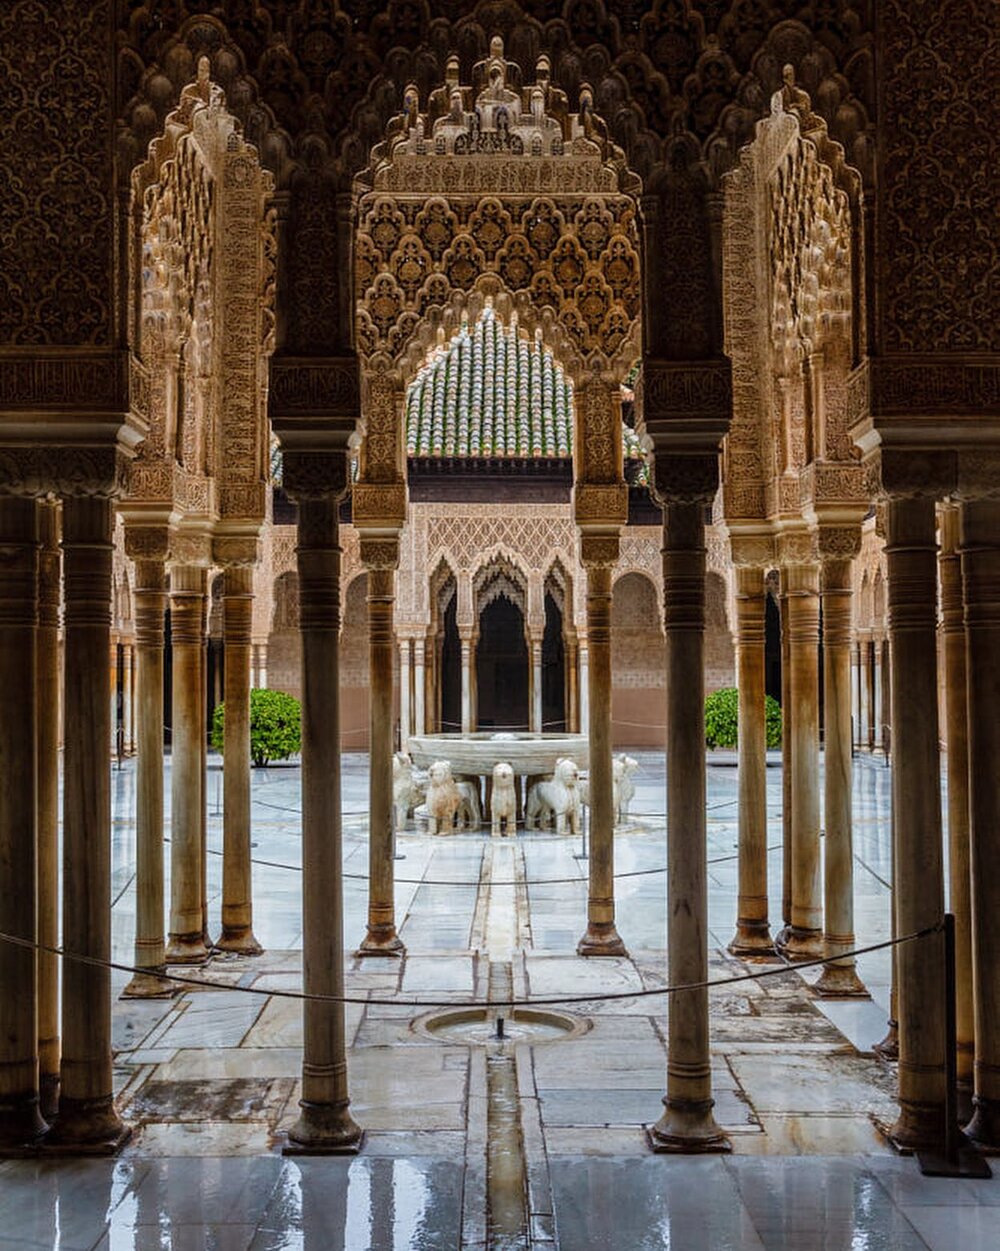 Since the early days of Arabs in Al Andalus, people were filled with a longing for the Arabian east. Abdalrahman I was yearning for Damascus, he built palaces and mosques similar to the Umayyad architecture in the Levant, making it the typical archit